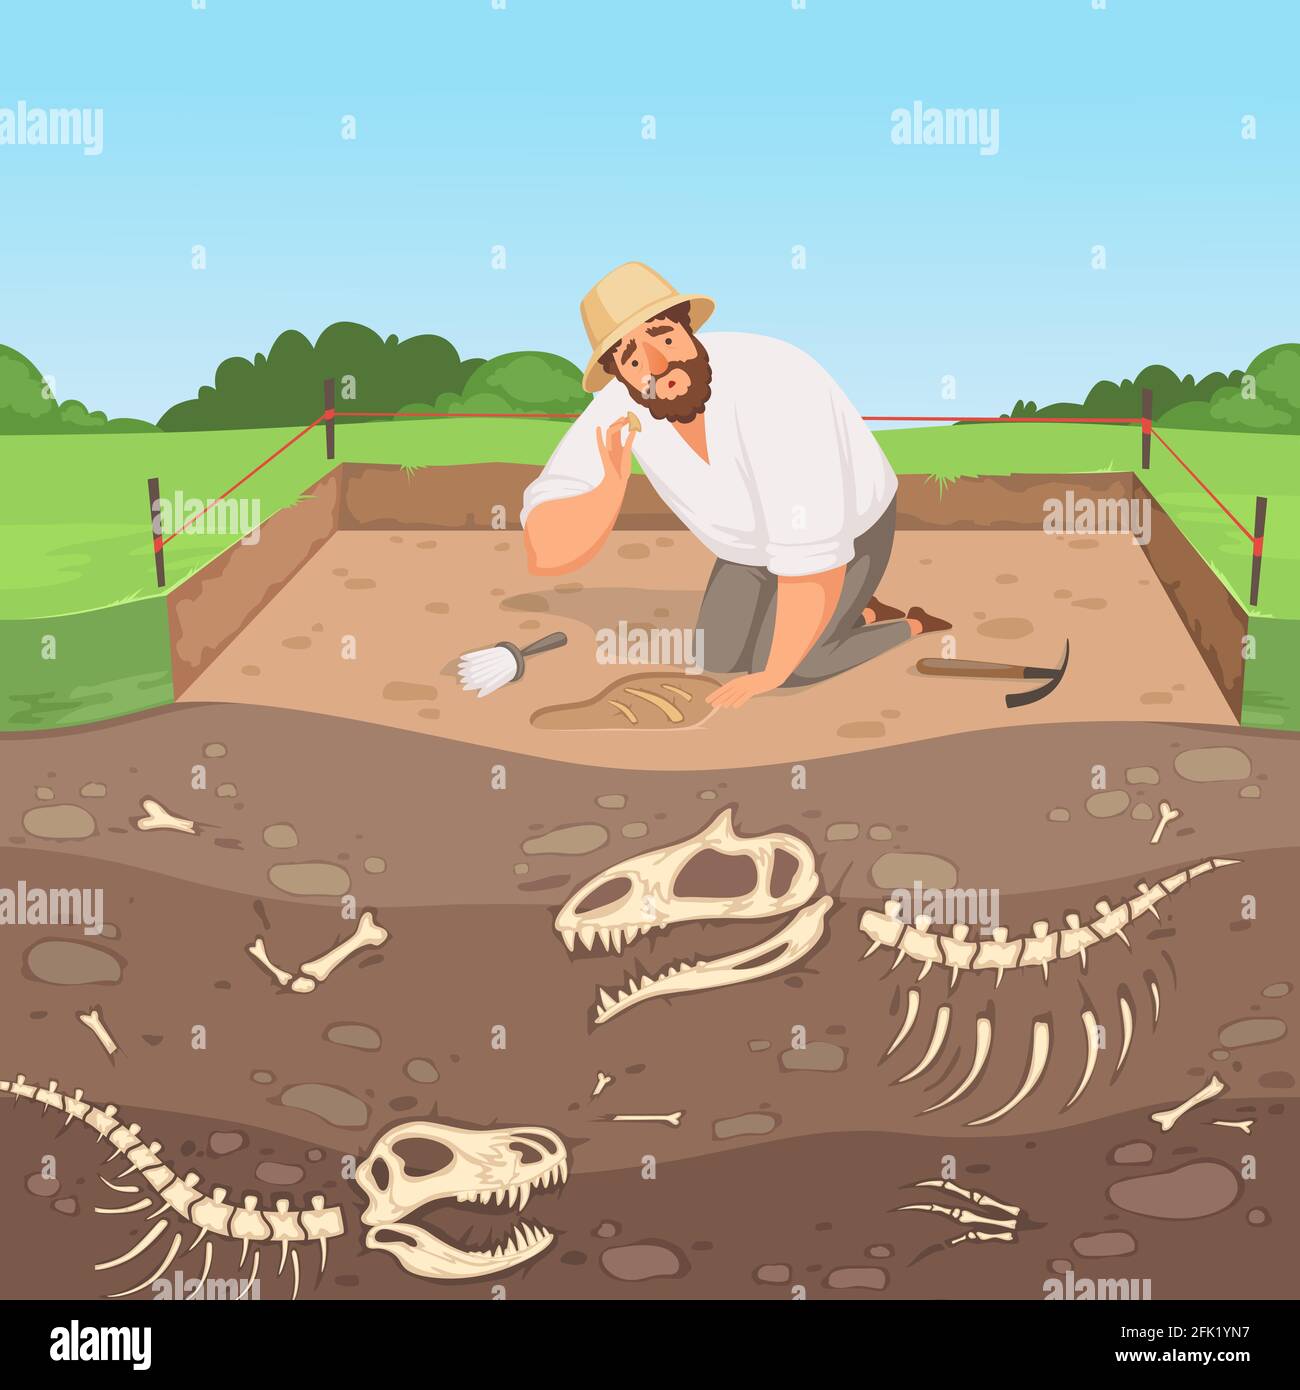 Archaeology character. Man discovery underground geology digging dinosaur bones in soil layers history landscape vector background Stock Vector